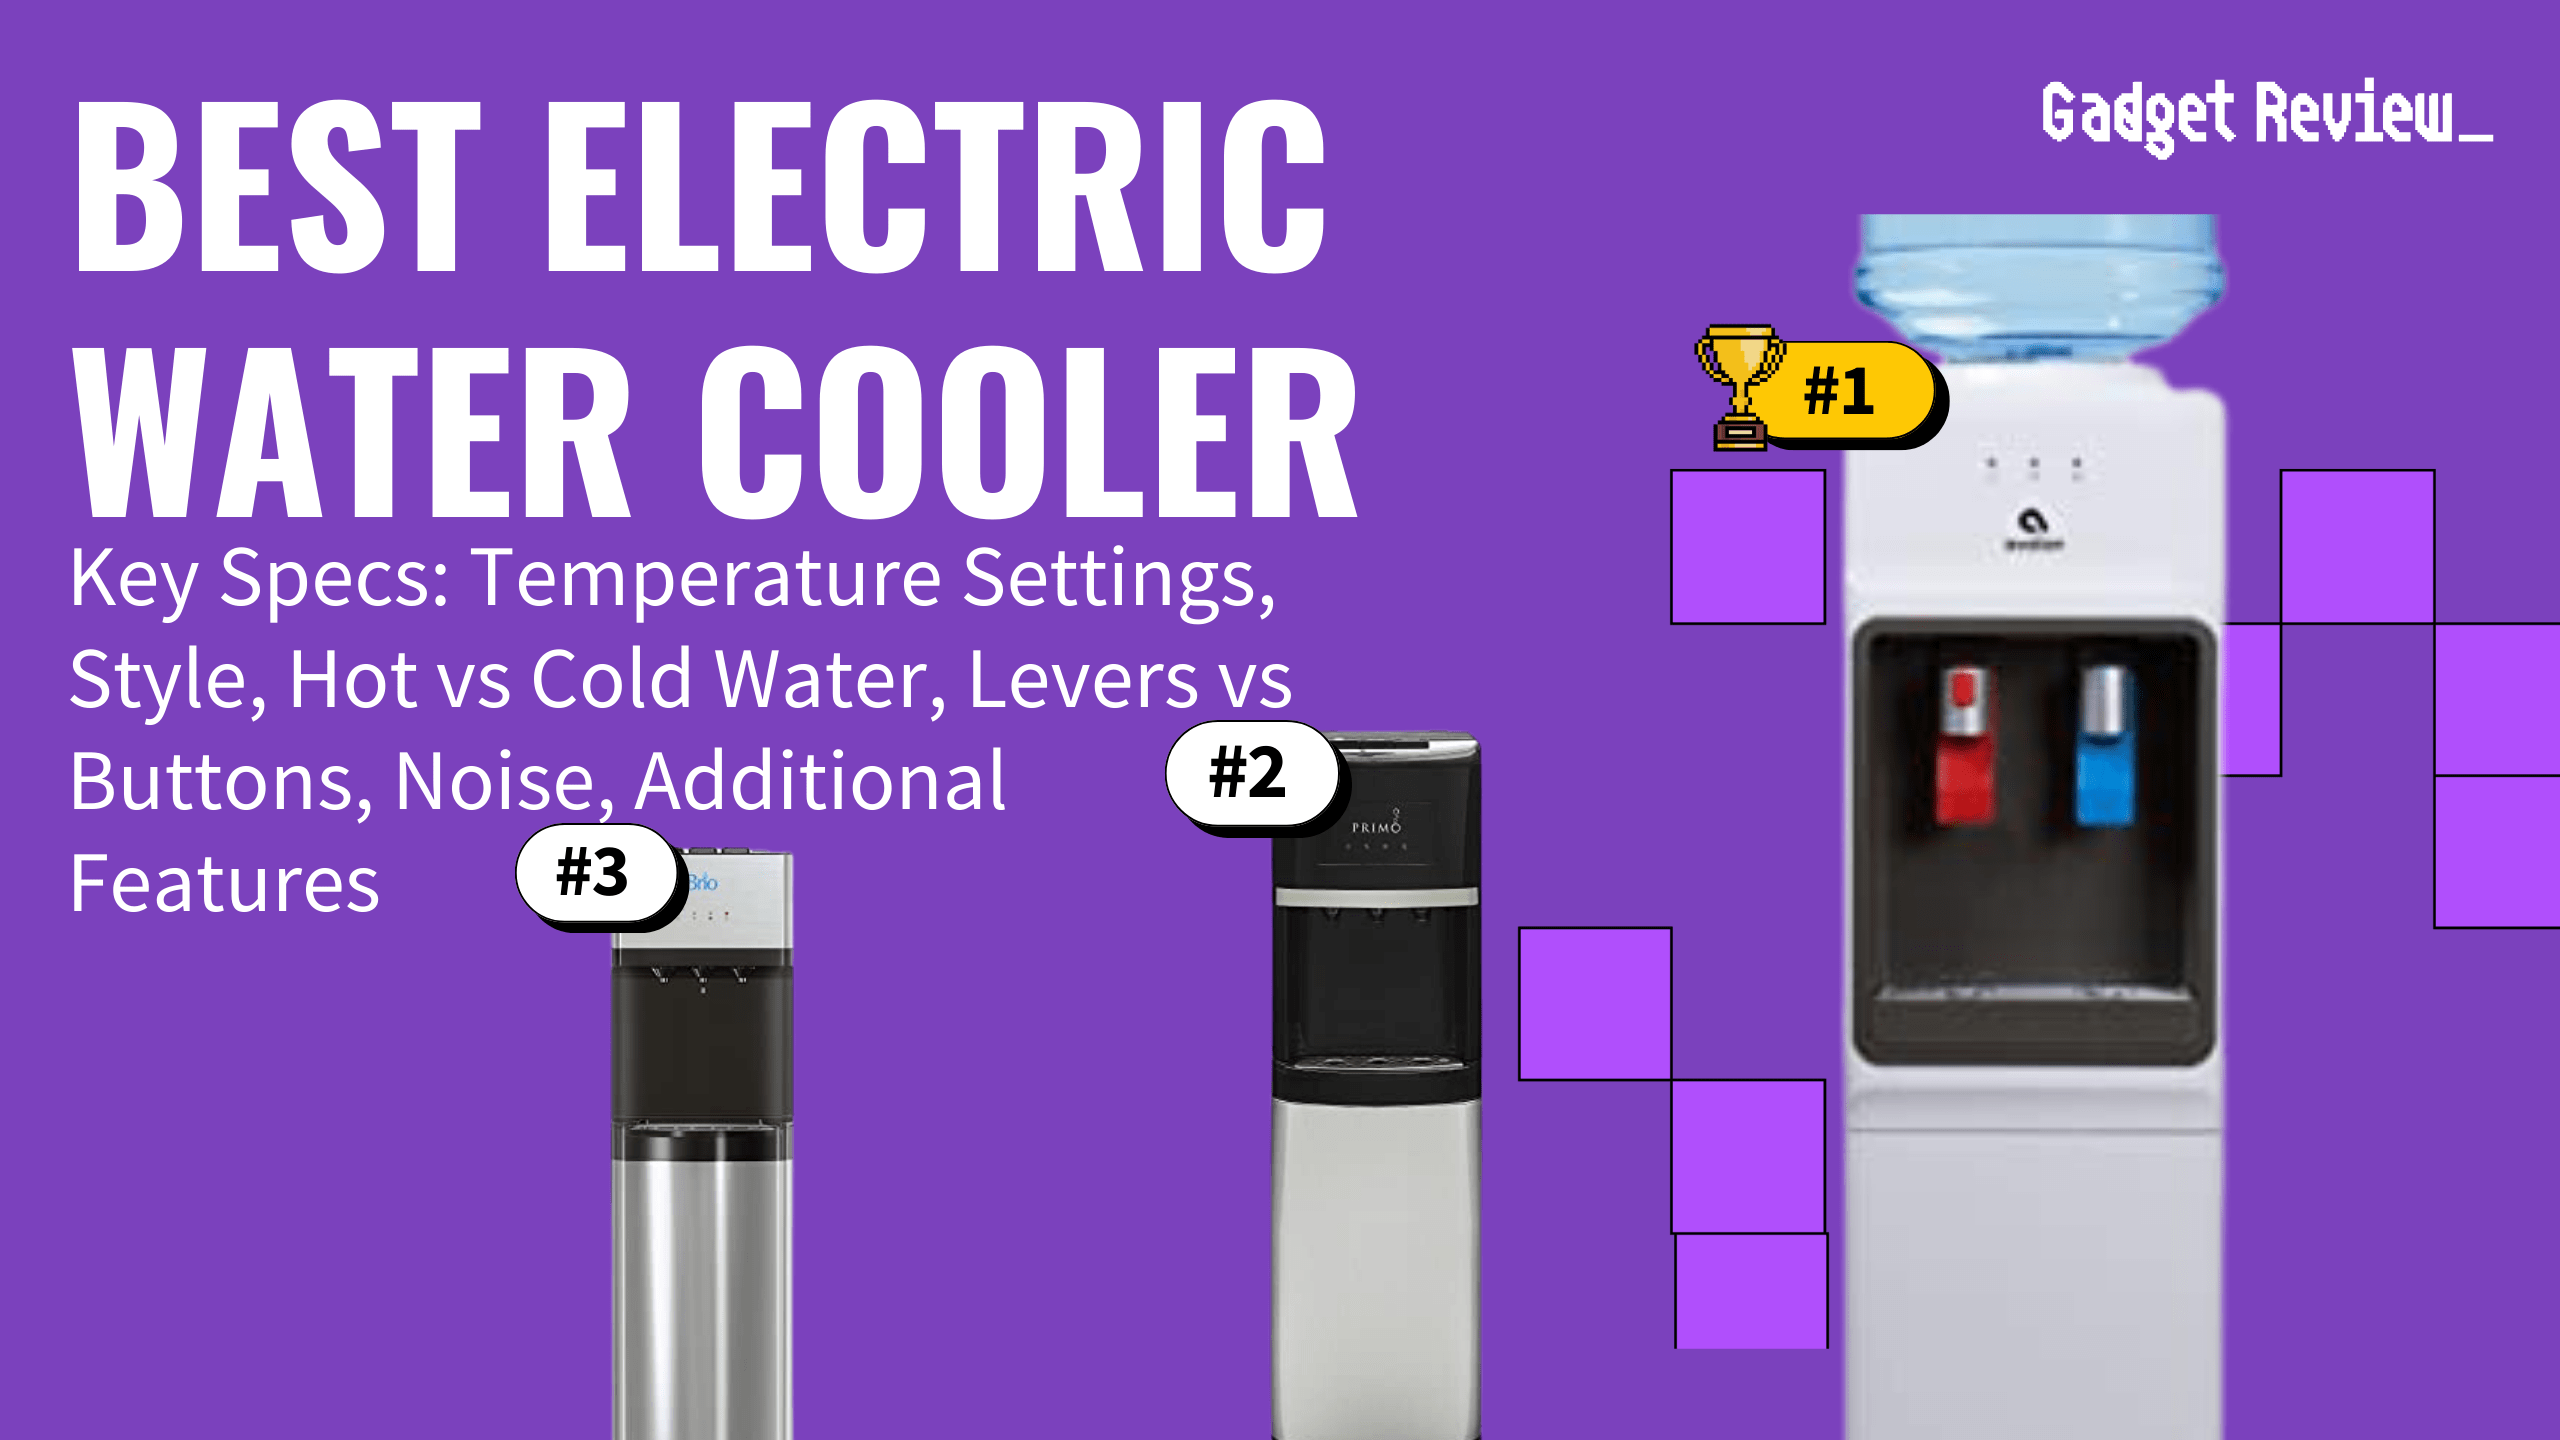 best electric water cooler featured image that shows the top three best home appliance models